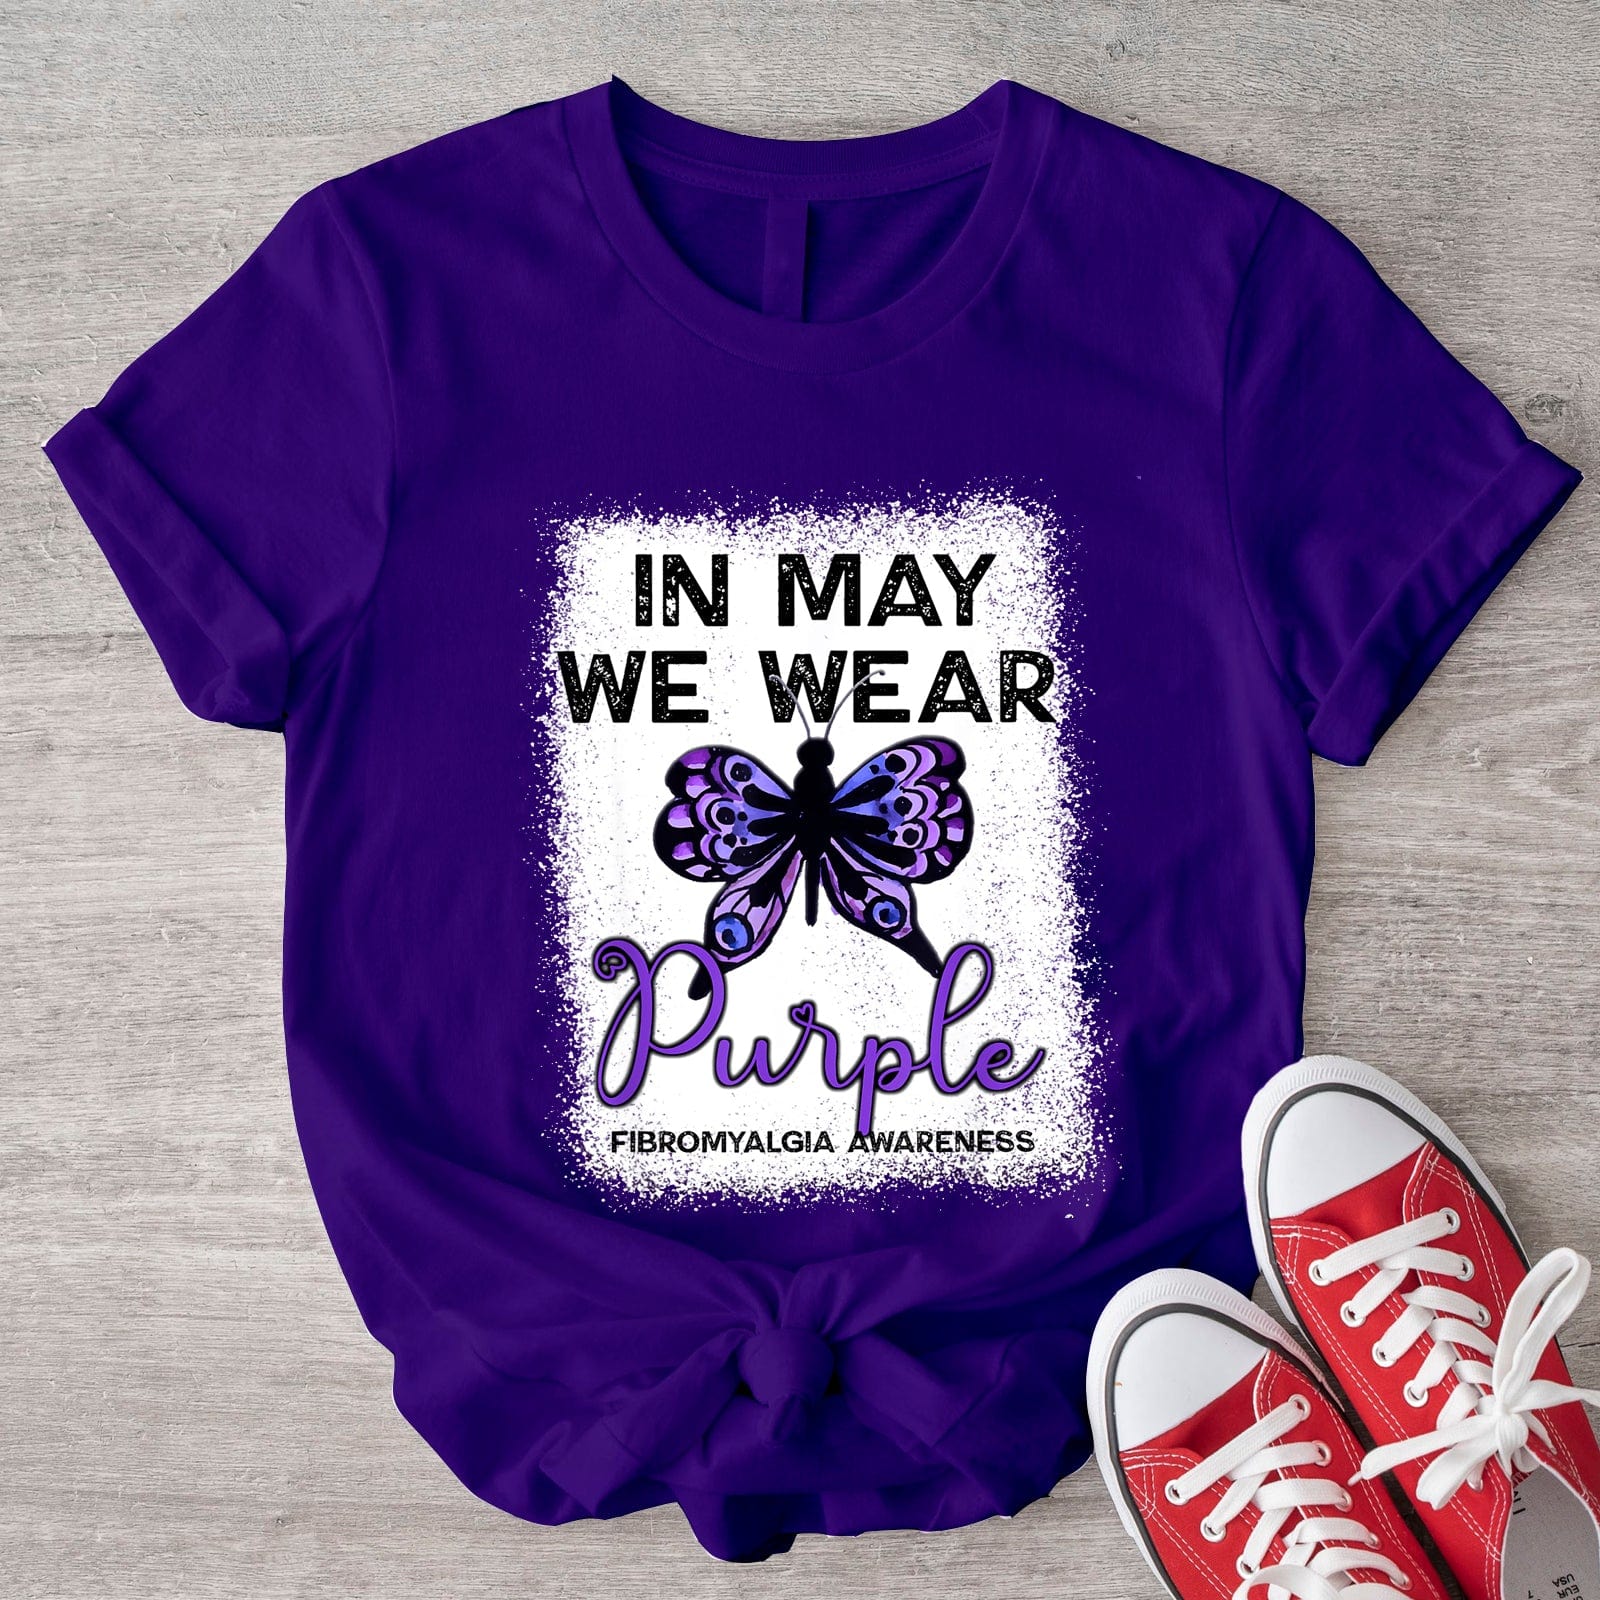 Fibromyalgia Awareness Shirts, In May We Wear Purple Butterfly